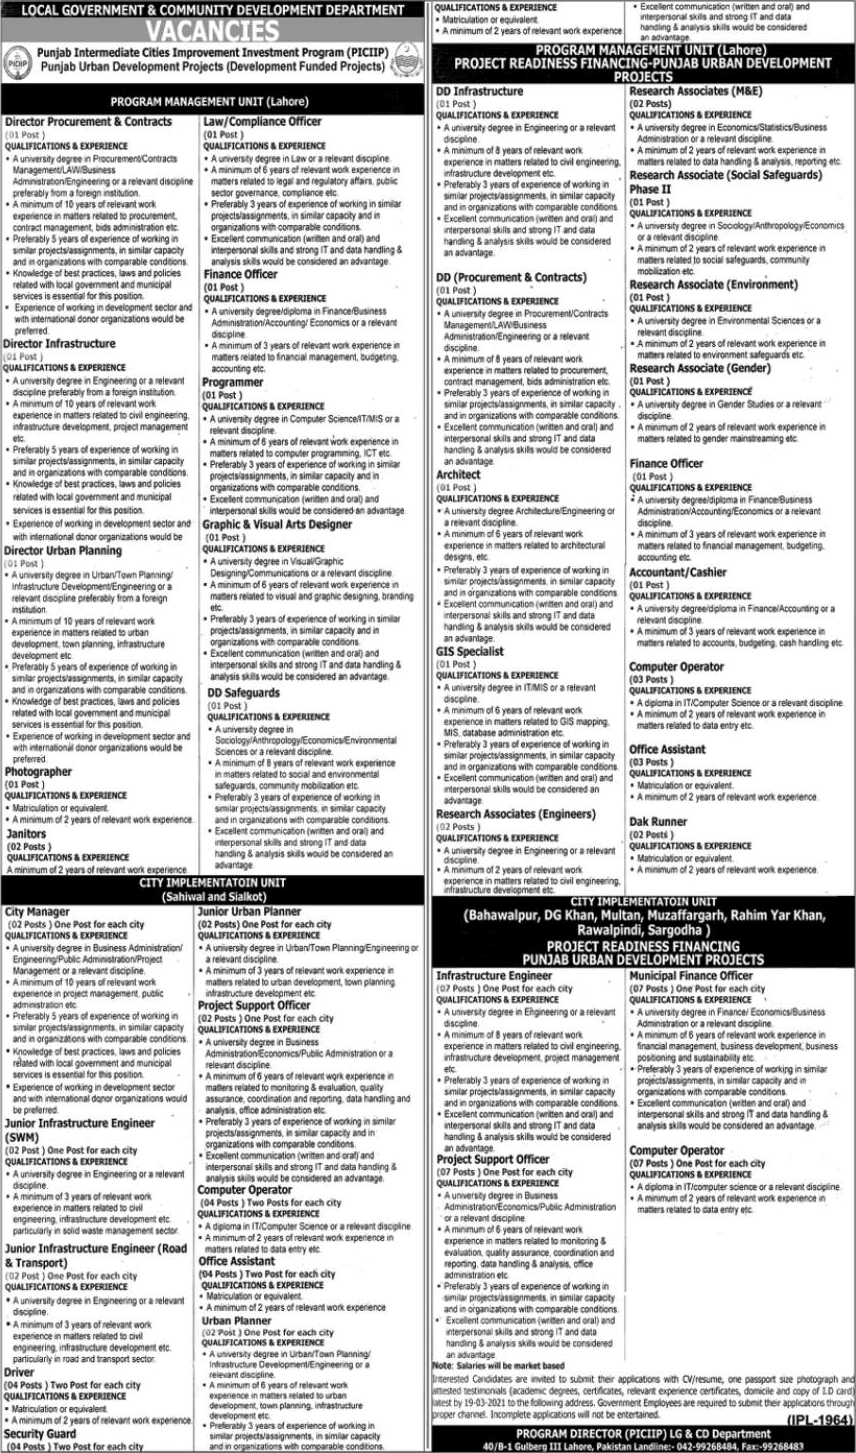 Local Government and Community Development Department Punjab Jobs 2021 March PICIIP Latest